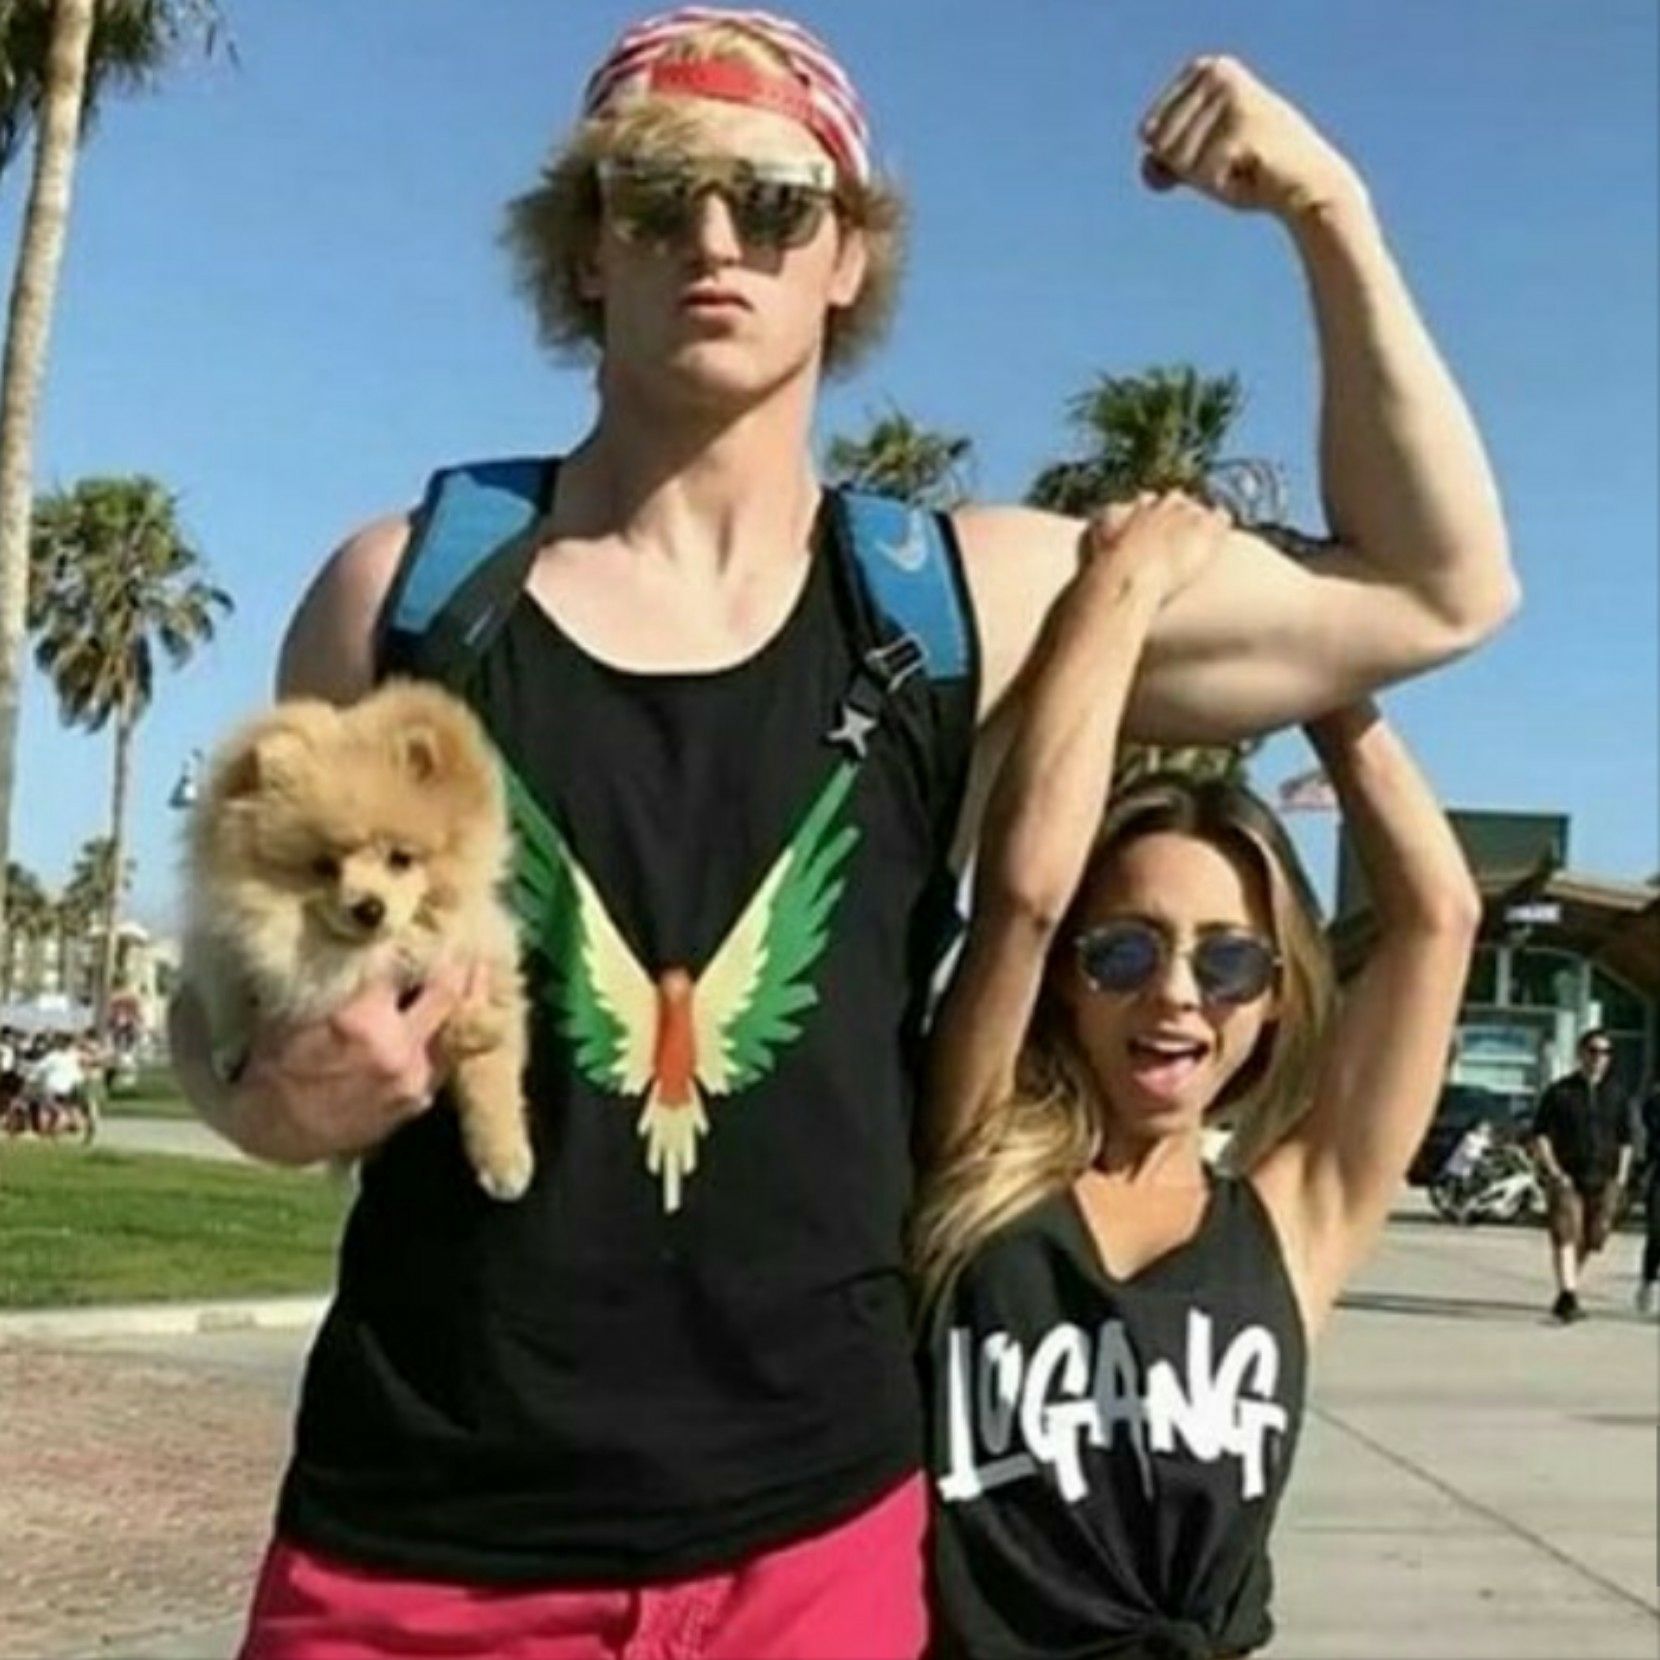 berk ozturk recommends ayla and logan paul pic